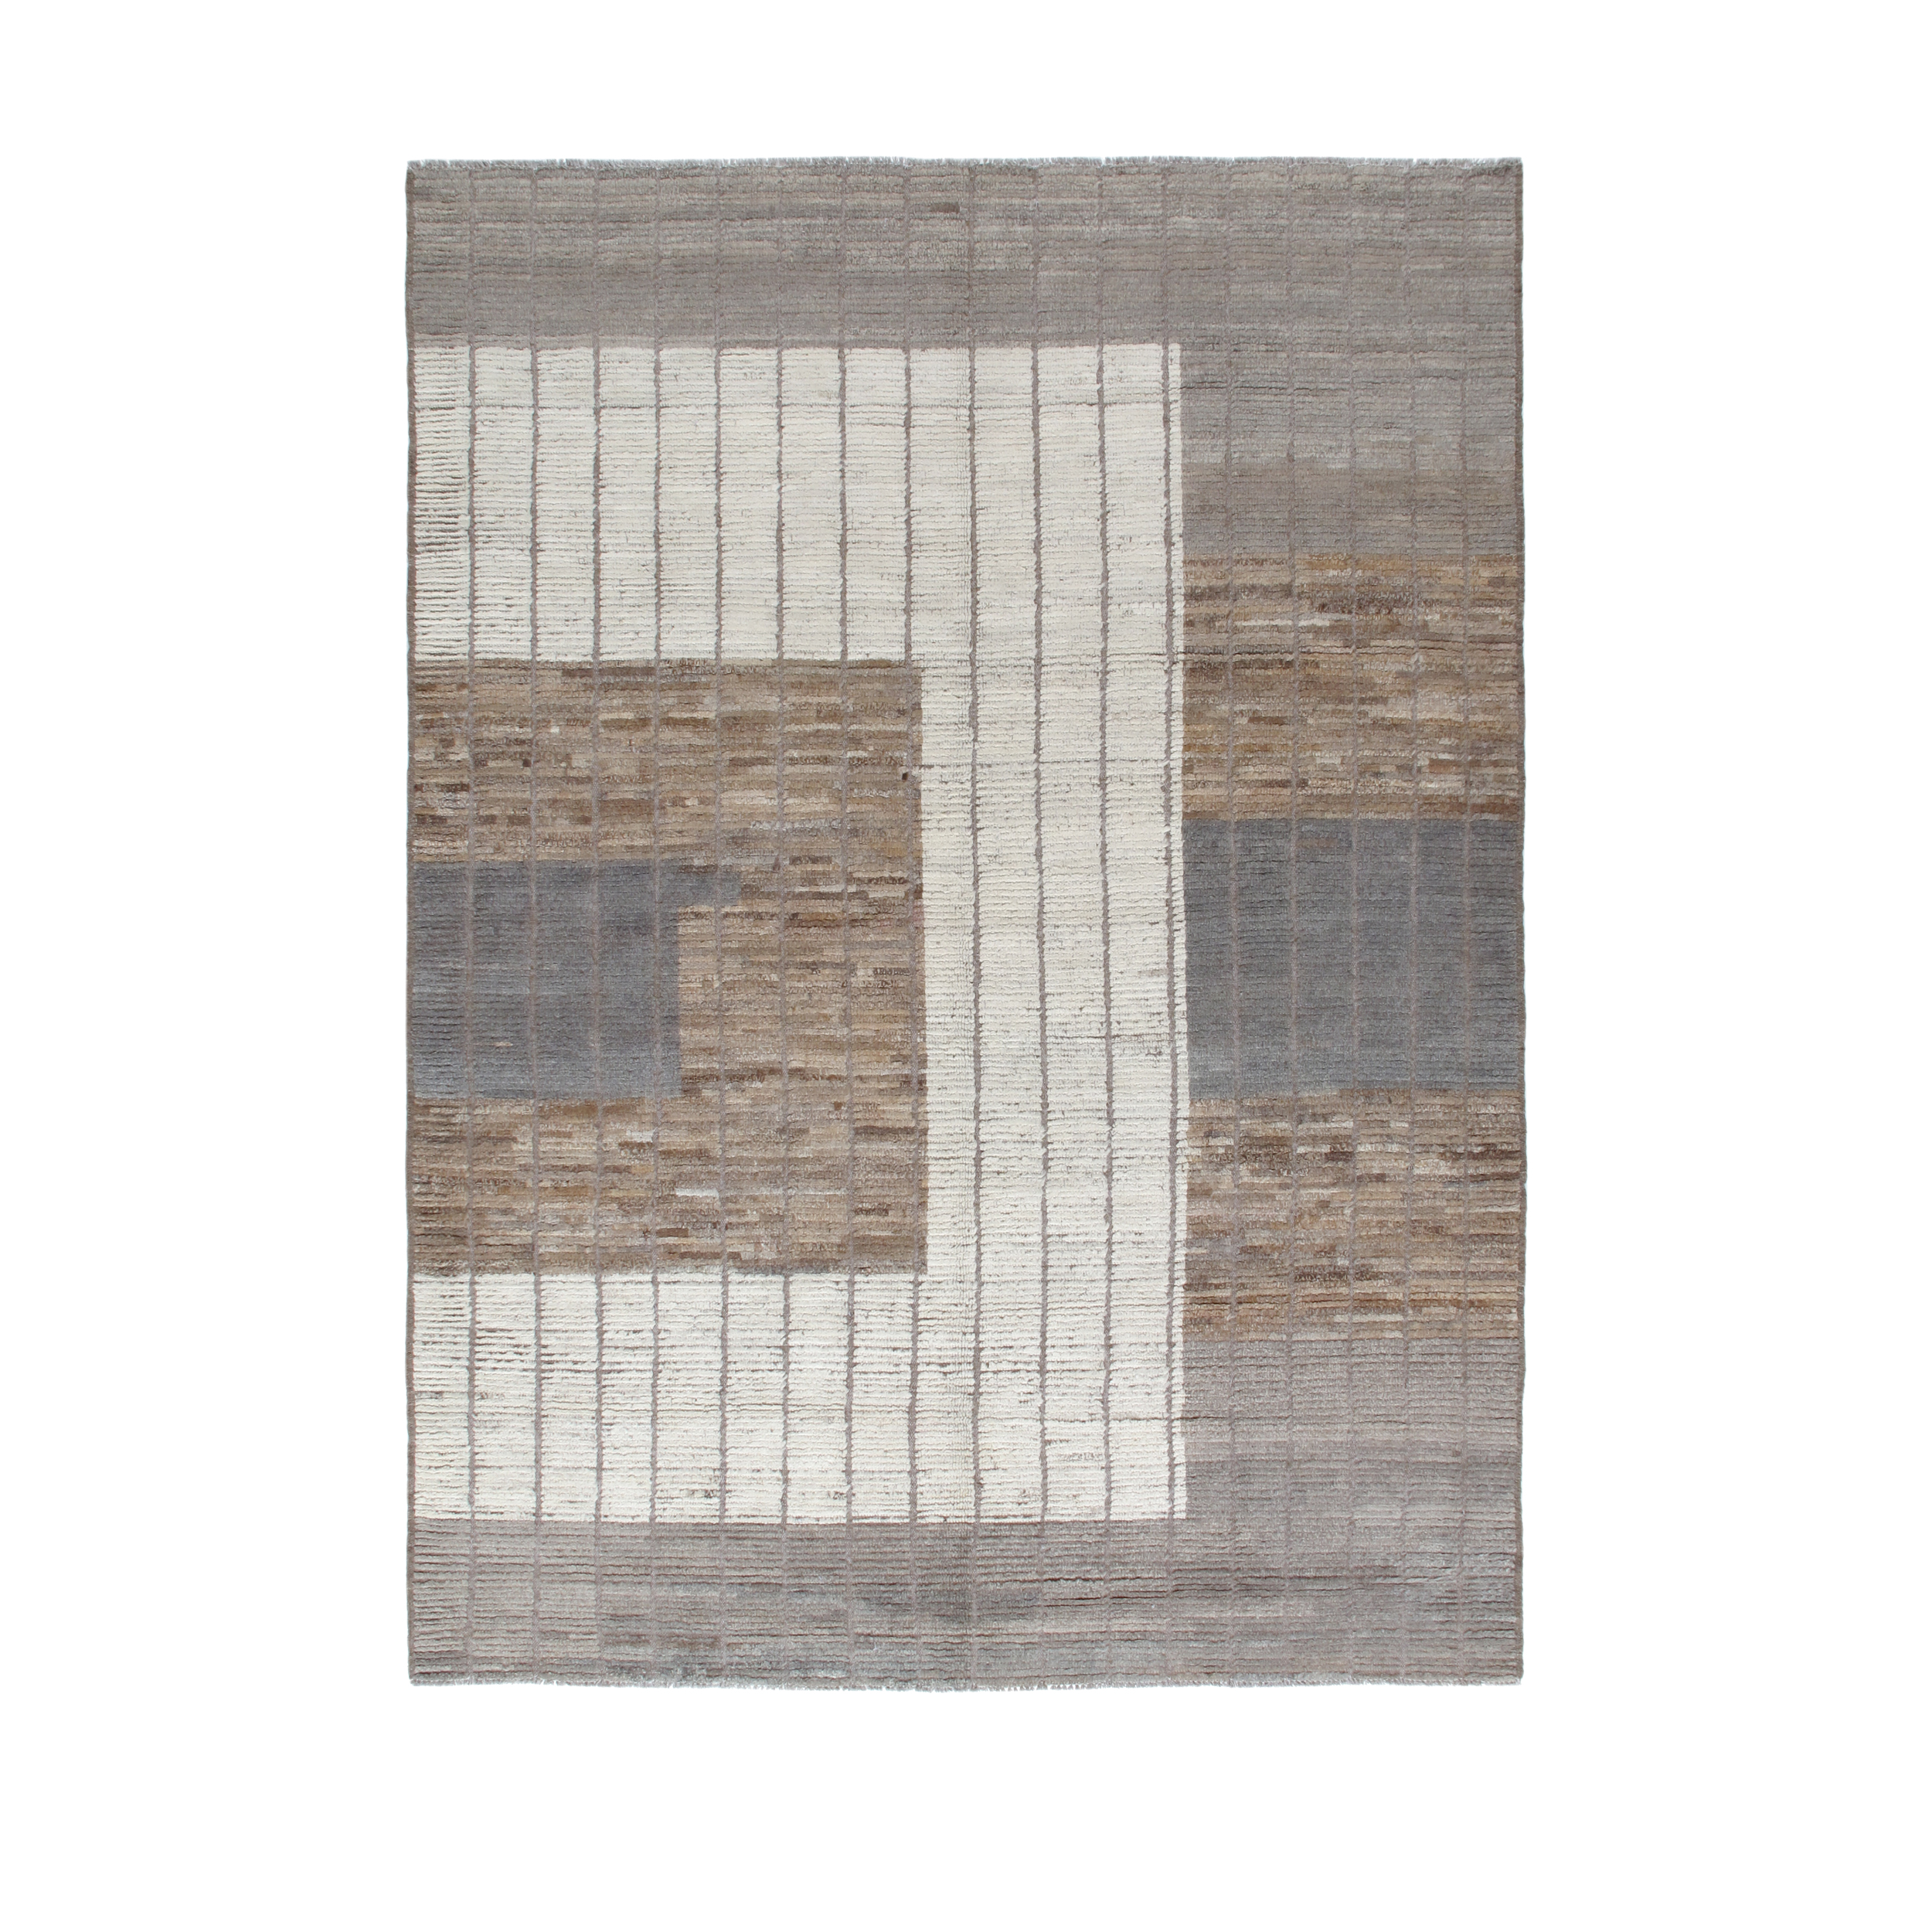 This Marrakech rug is hand-knotted and made of 100% wool. 